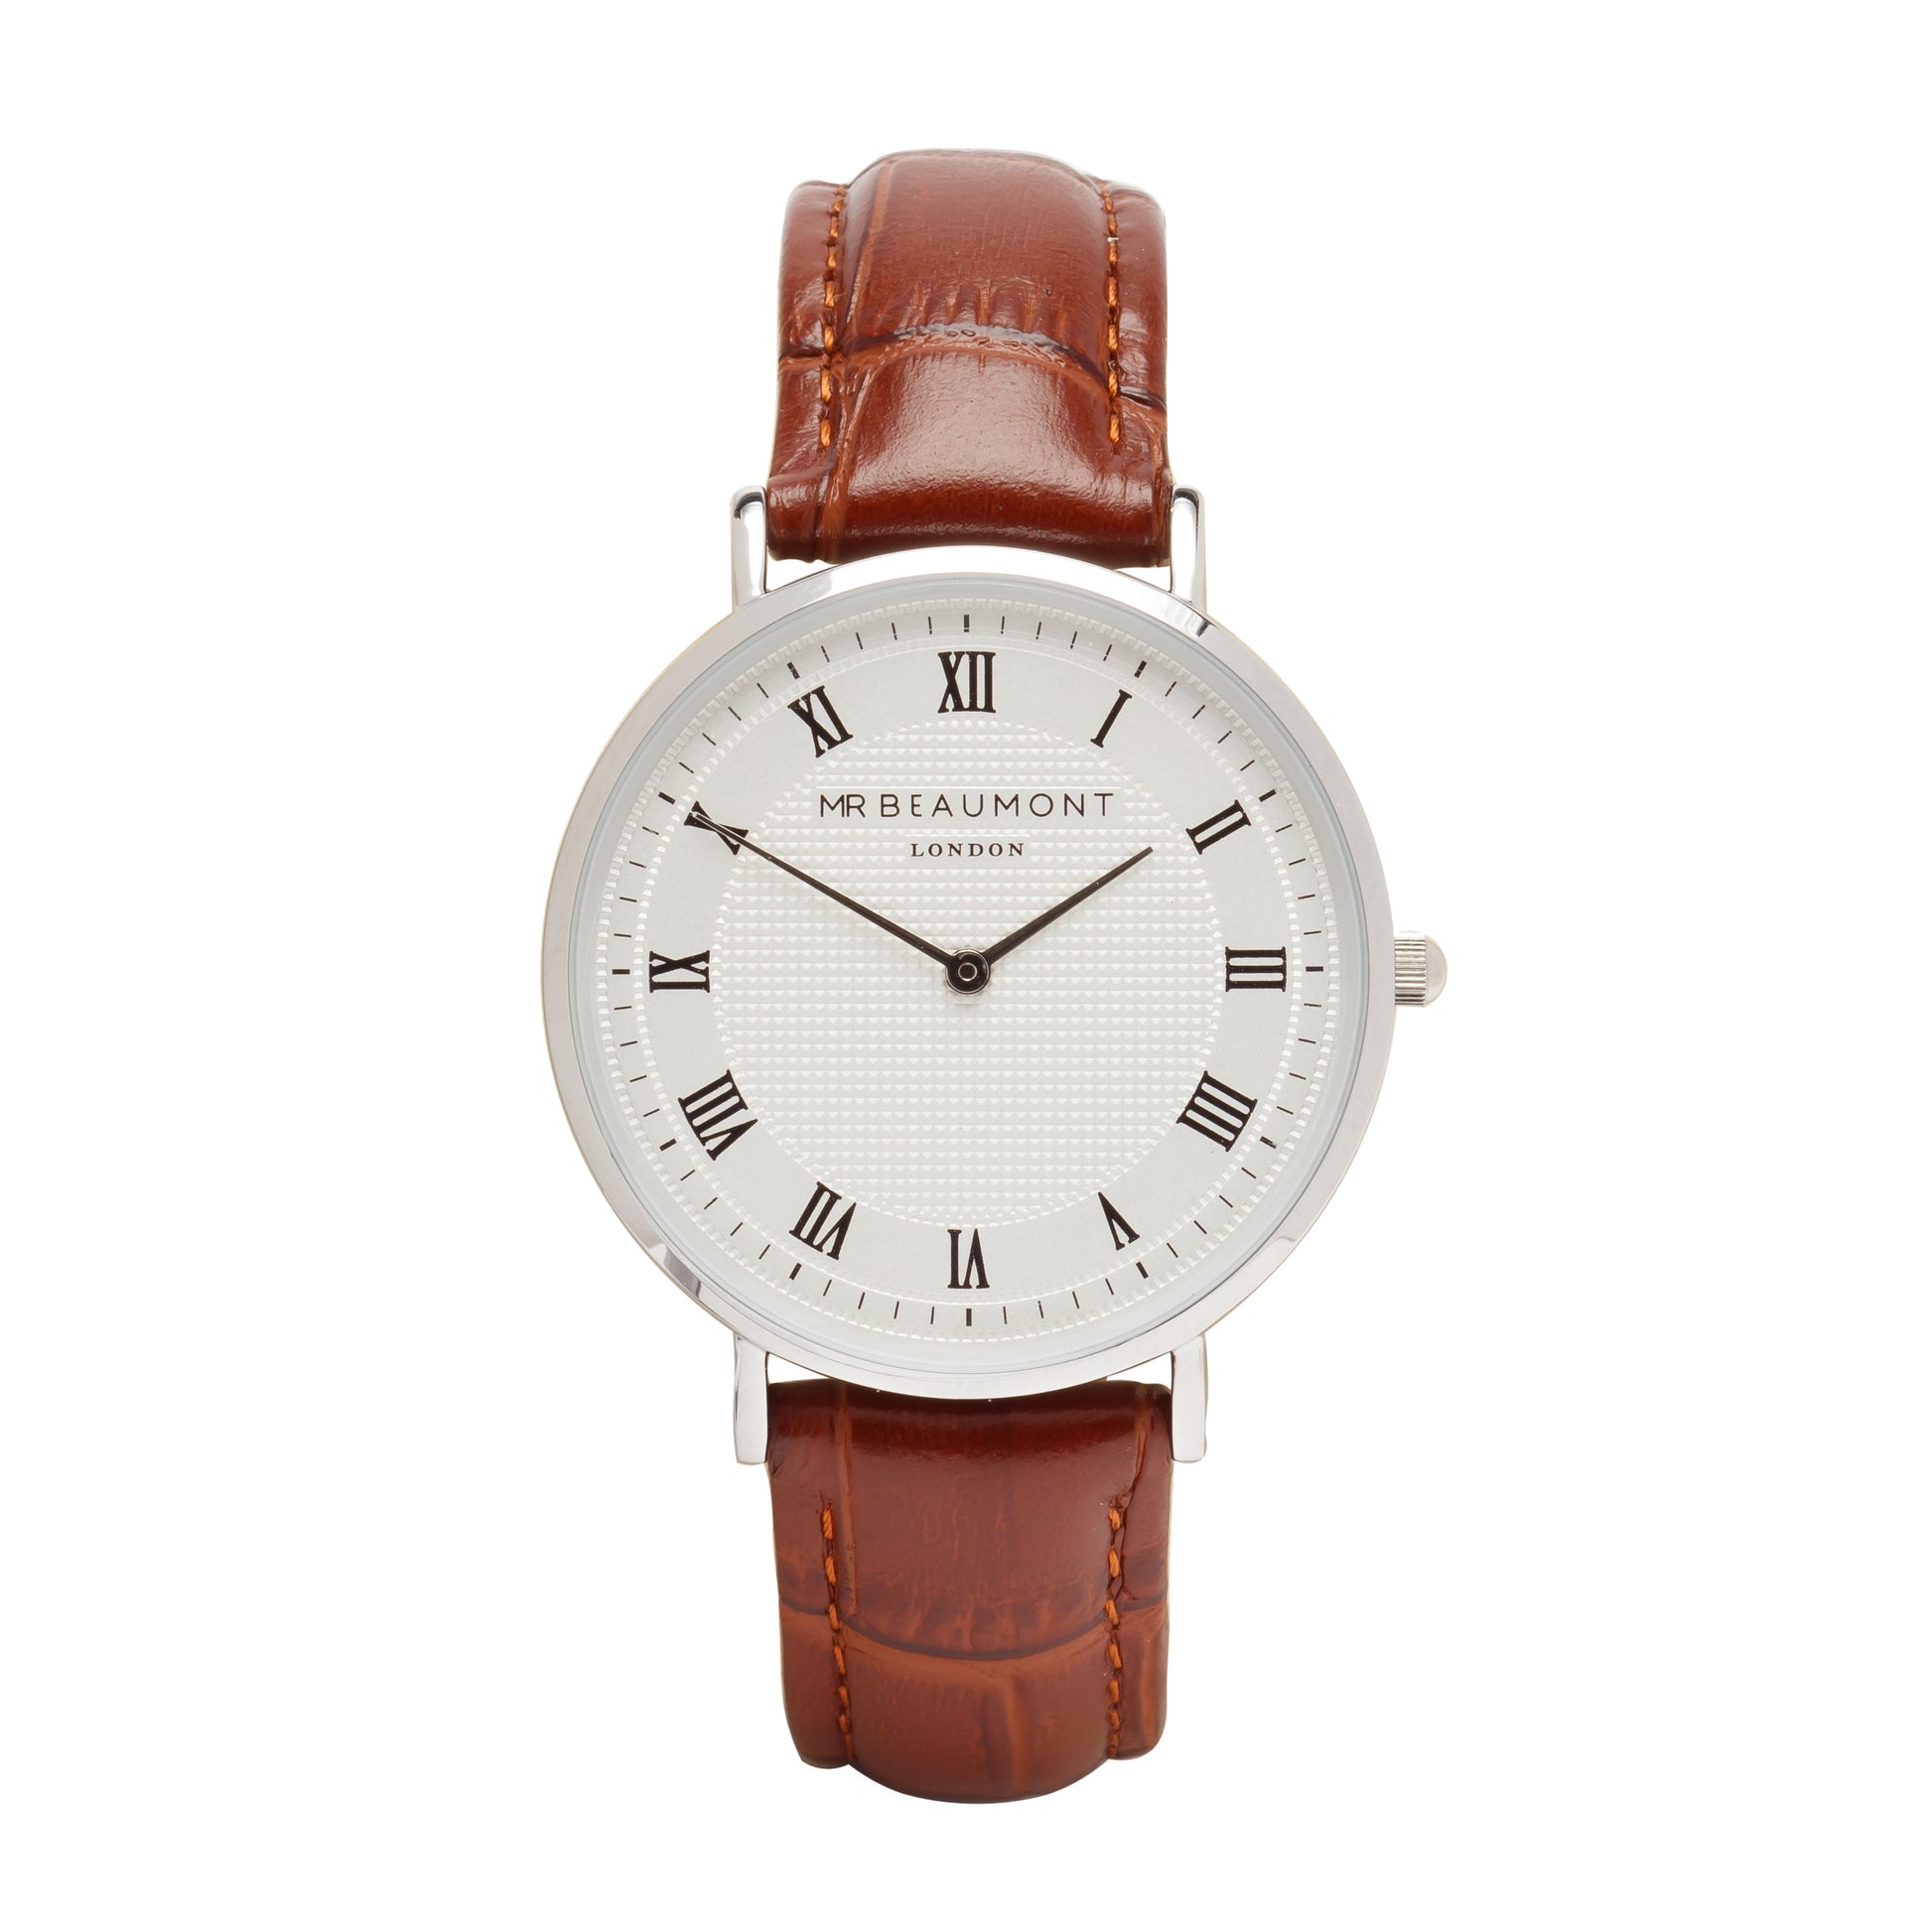 Personalized Men's Watches - Mr Beaumont Men's Personalized Watch in Vintage Brown 